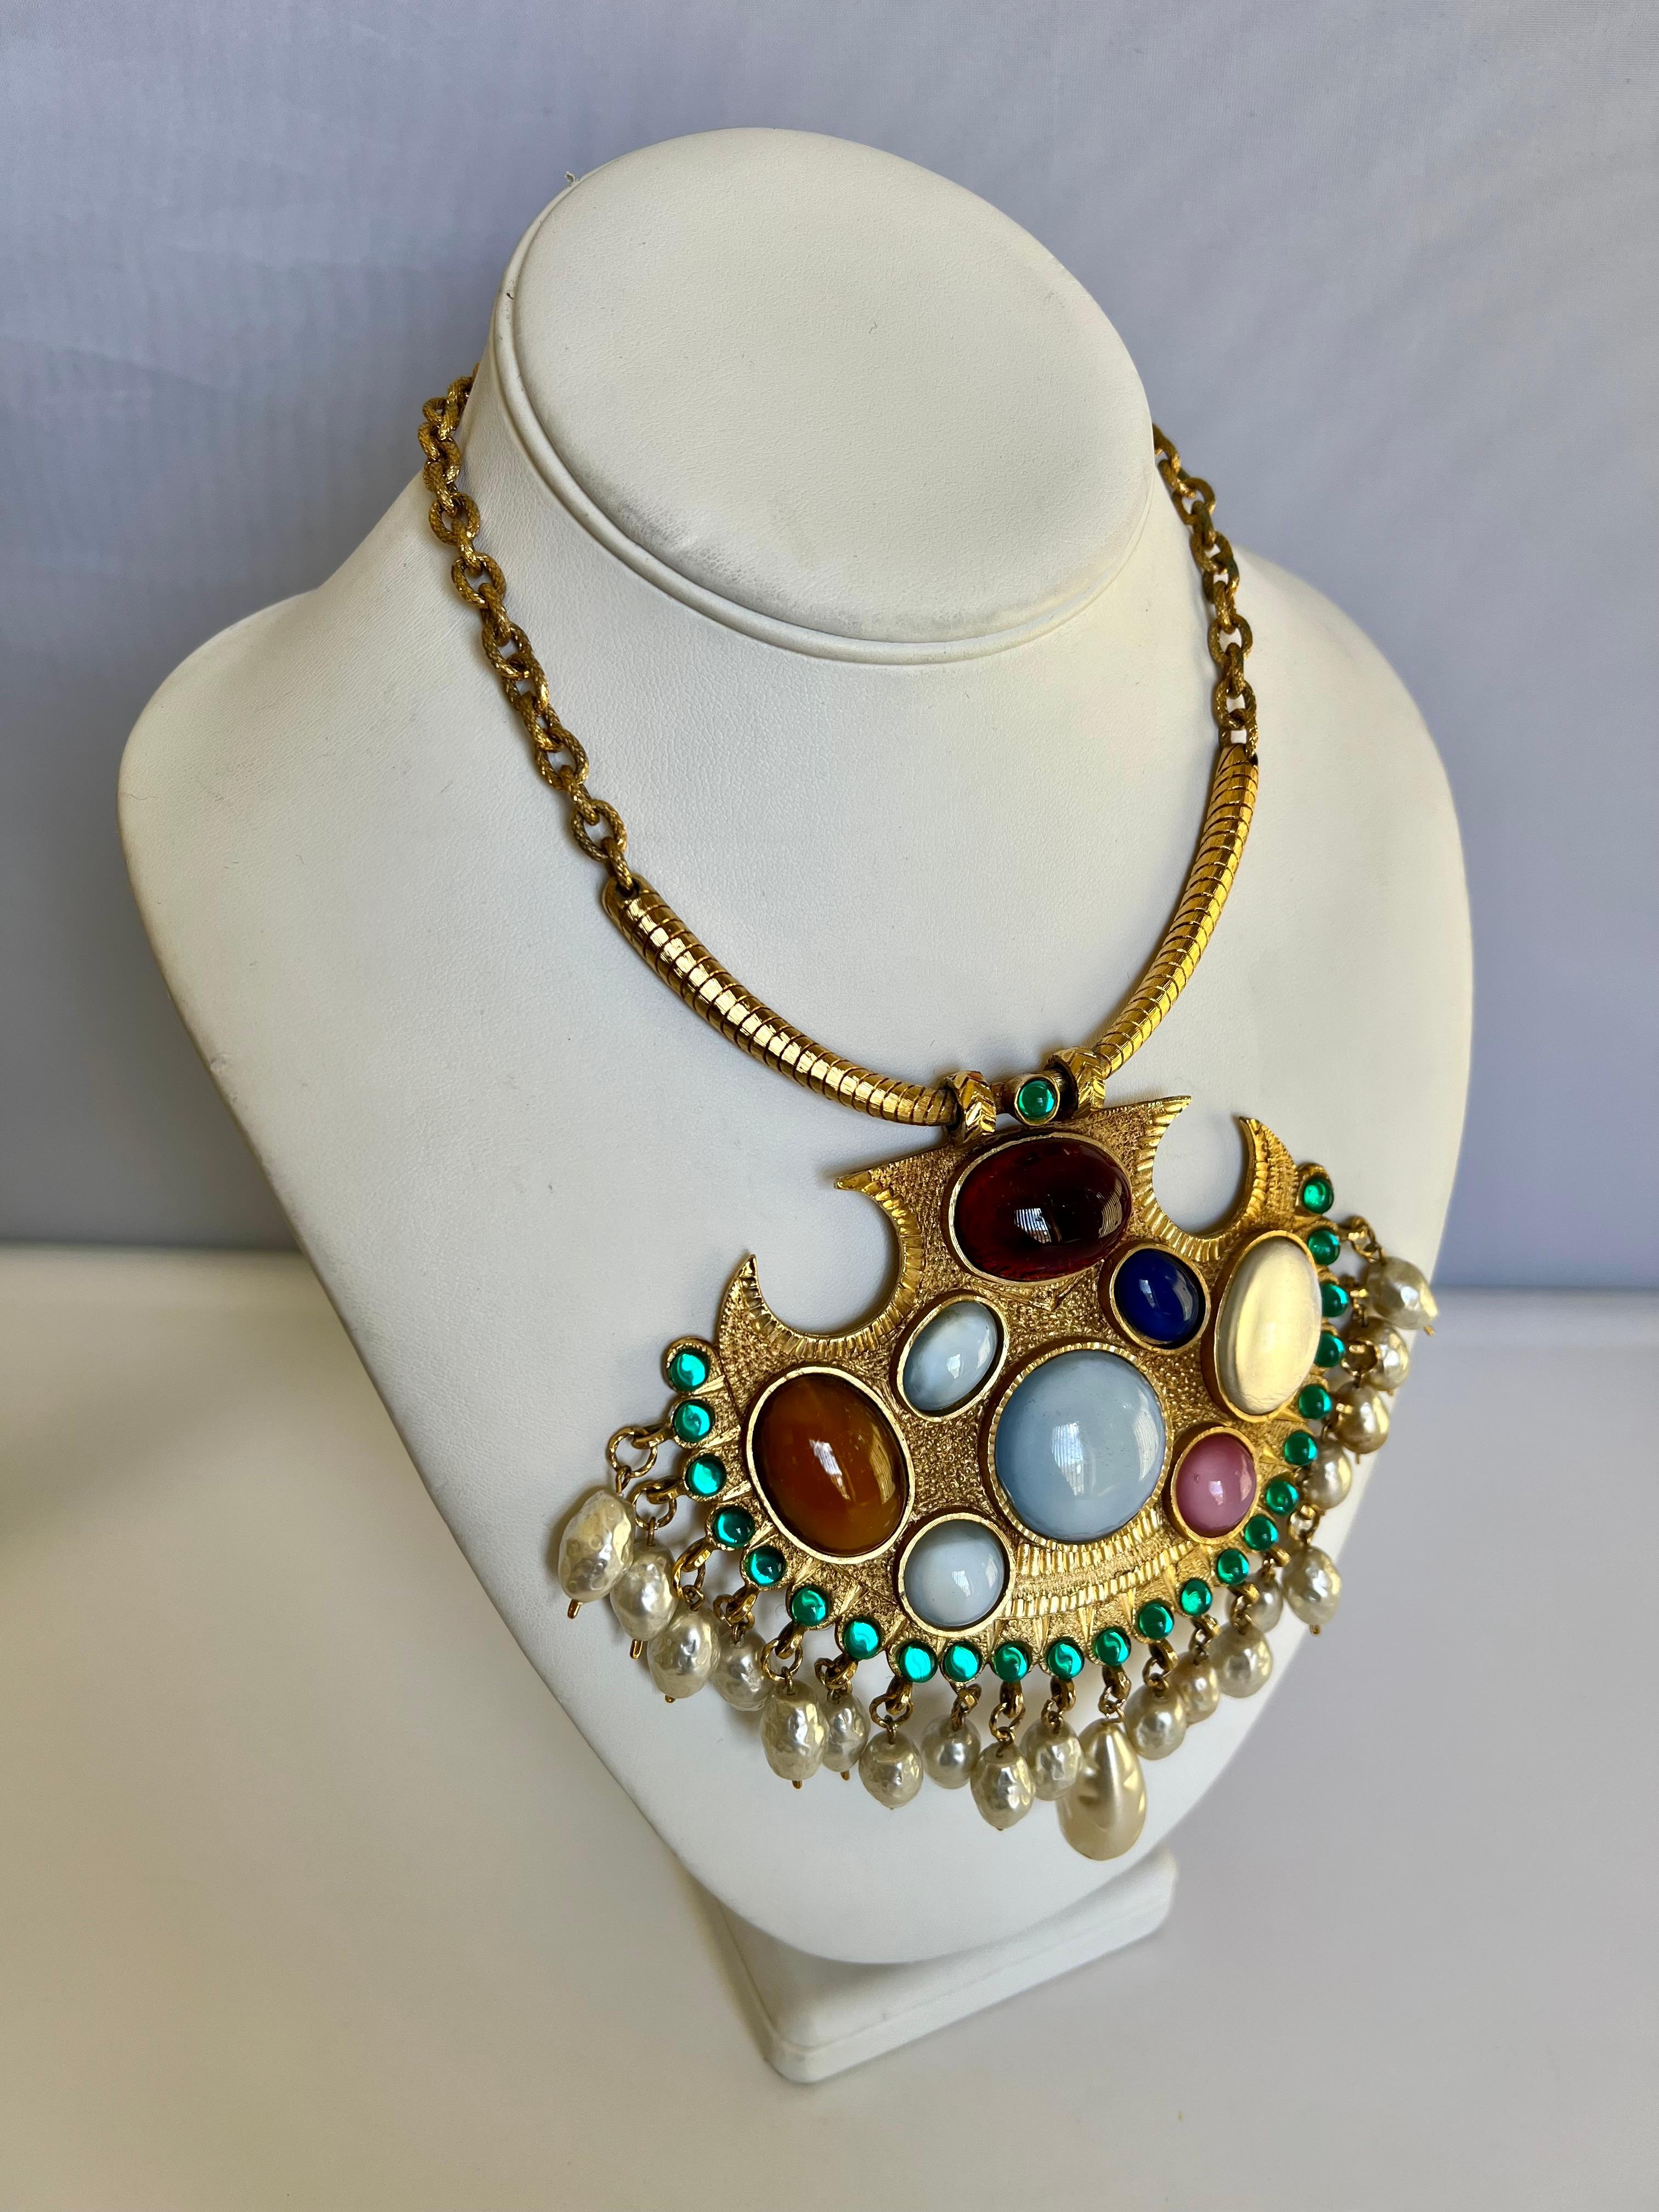 Vintage Chanel Middle Eastern Motif Jewel and Pearl Pendant Necklace  For Sale 3